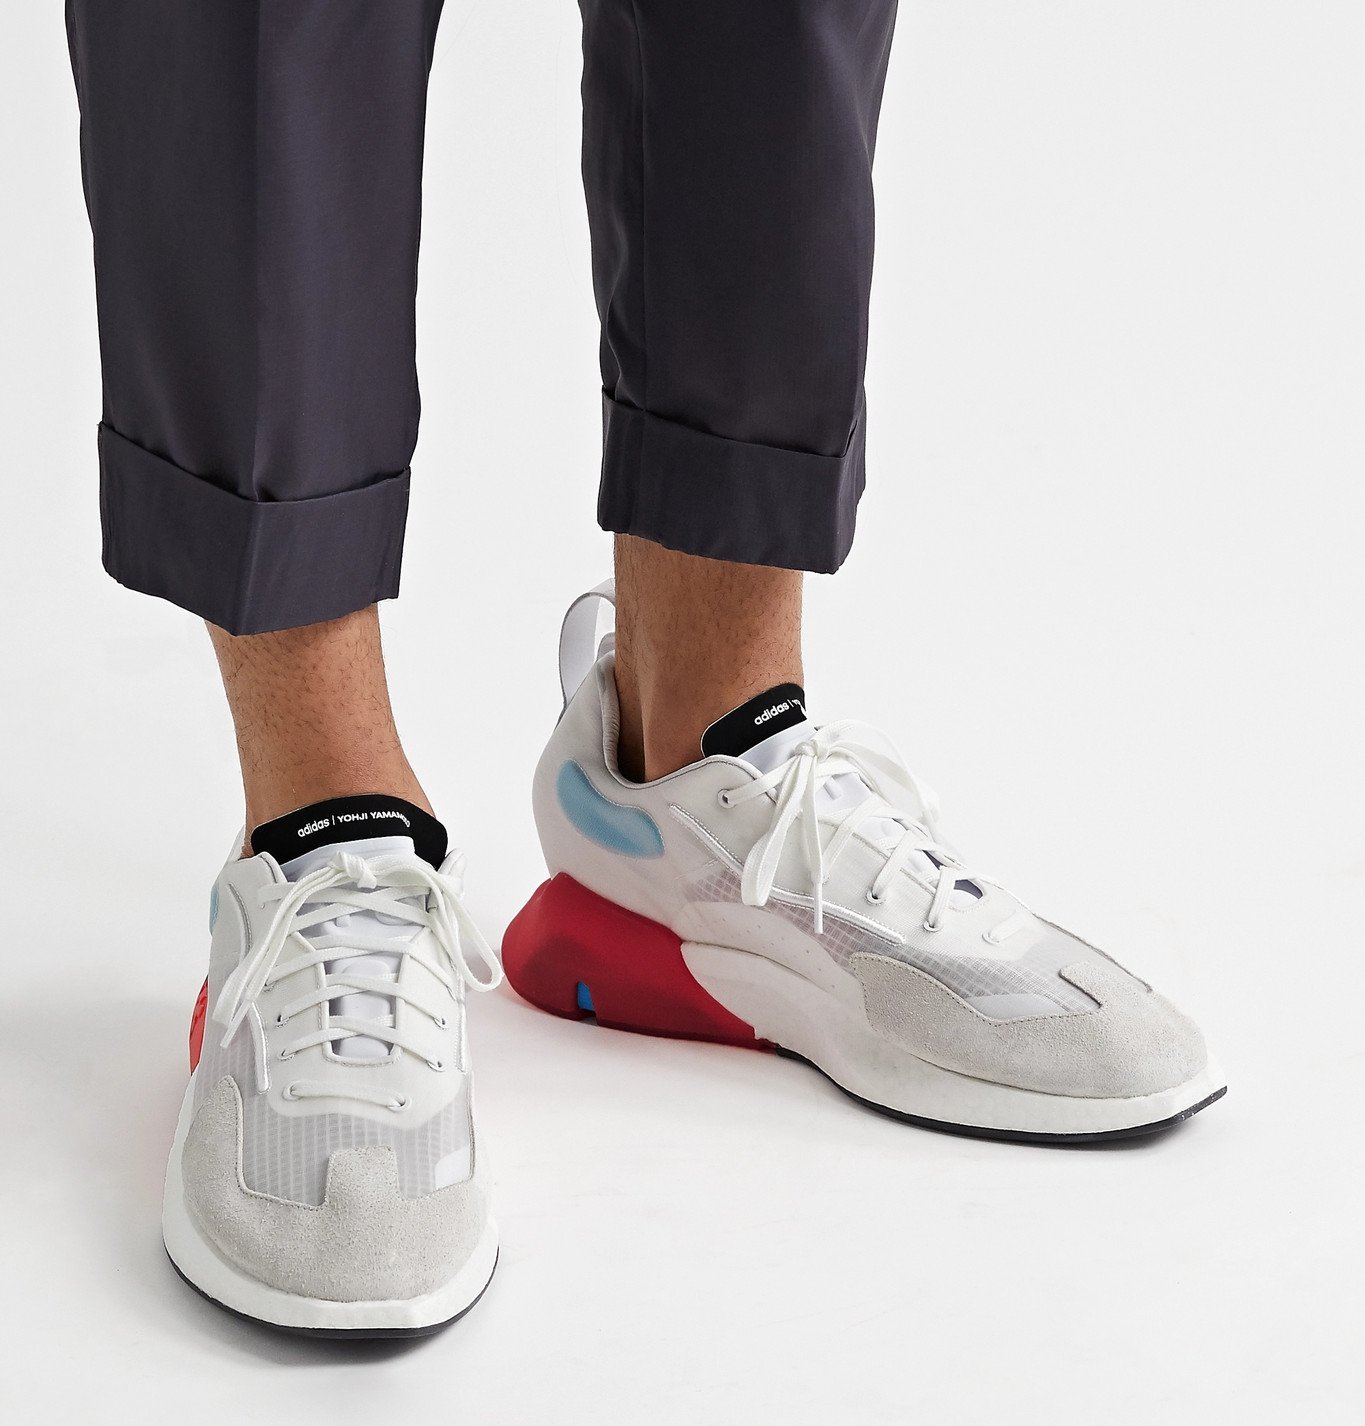 Y-3 - Orisan Suede and Leather-Trimmed Ripstop Sneakers - White Y-3